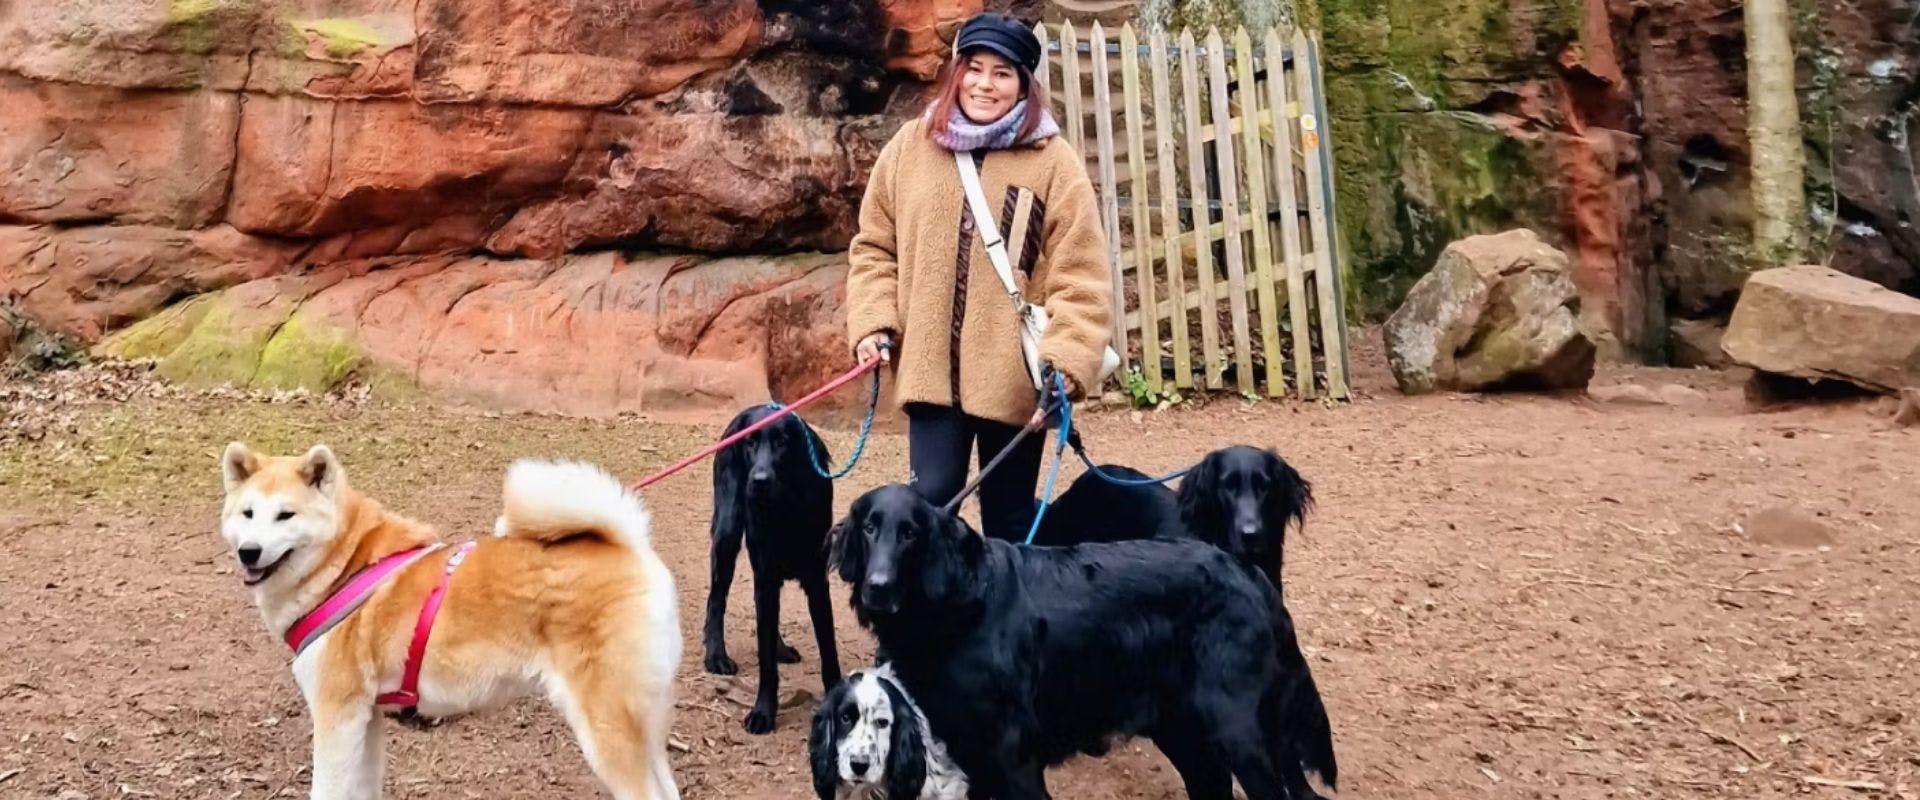 Pet sitter, Nikita standing with five dogs